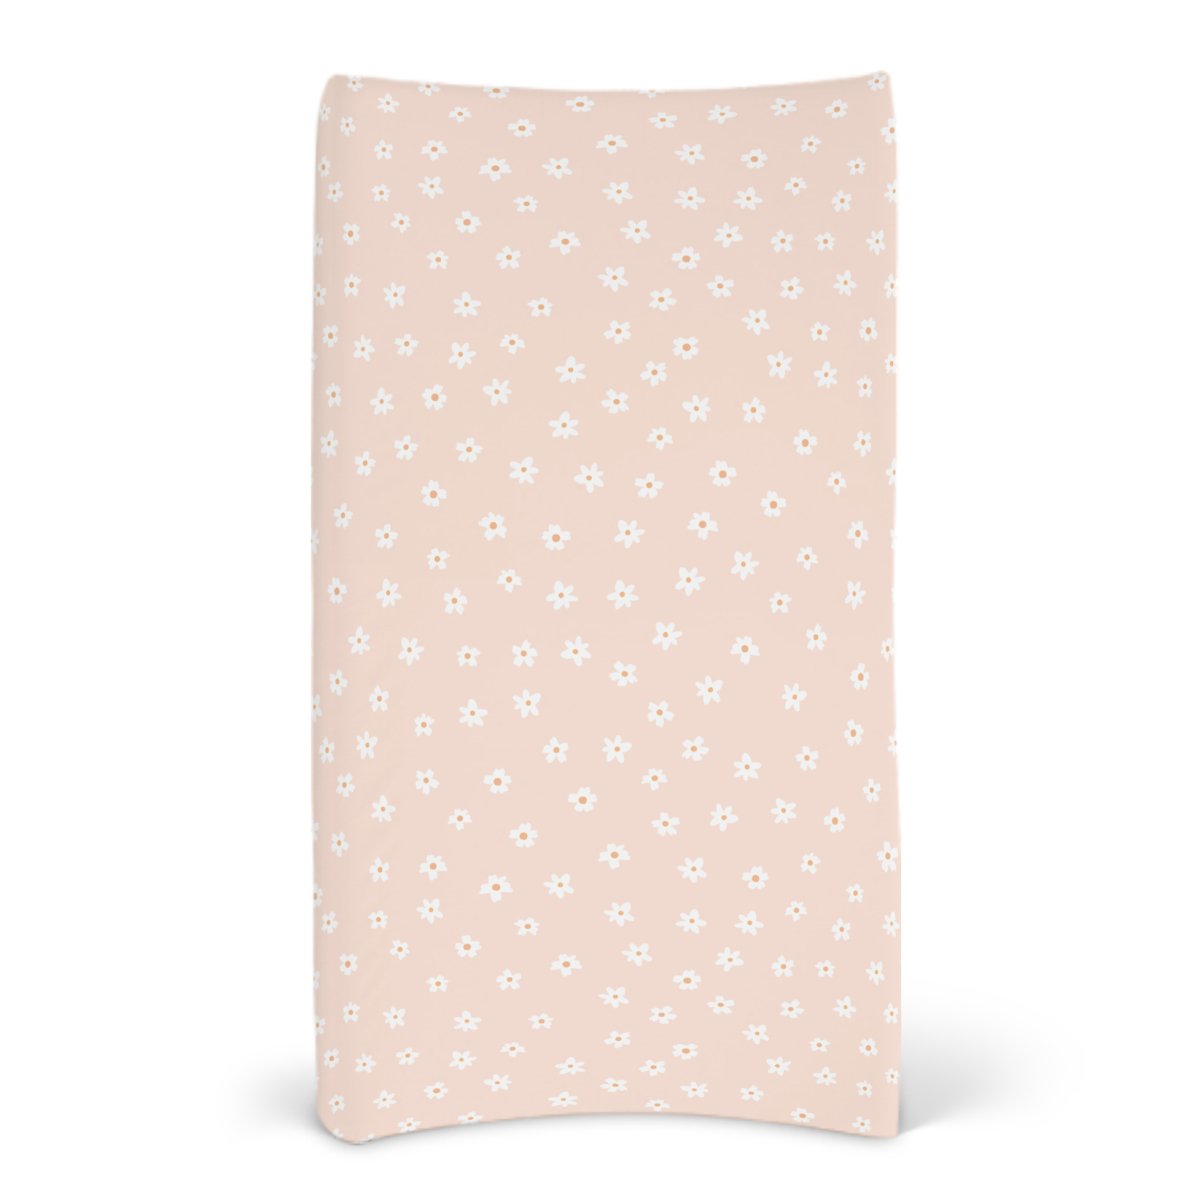 Daisy Changing Pad Cover - Changing Pad Covers